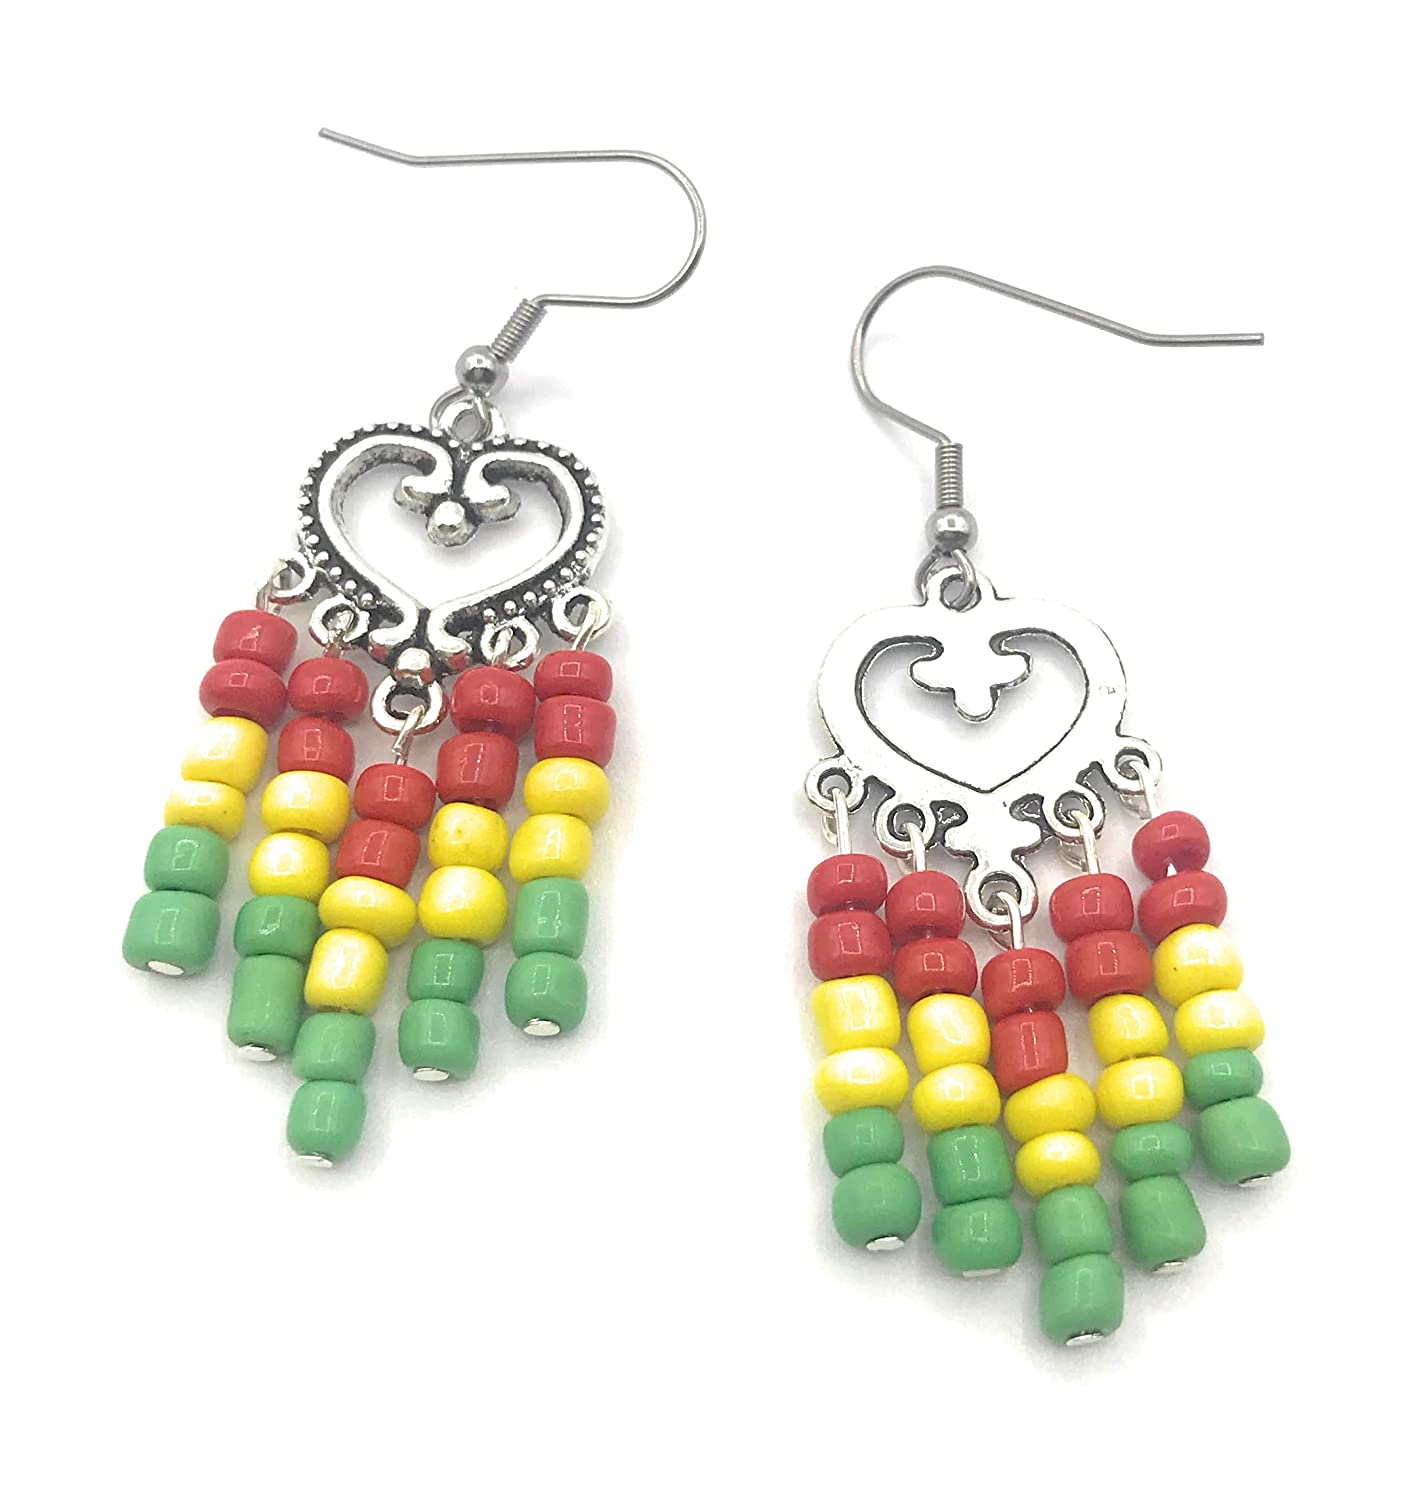 Rasta earrings in red yellow and green the front and back view from Scott D Jewelry Designs